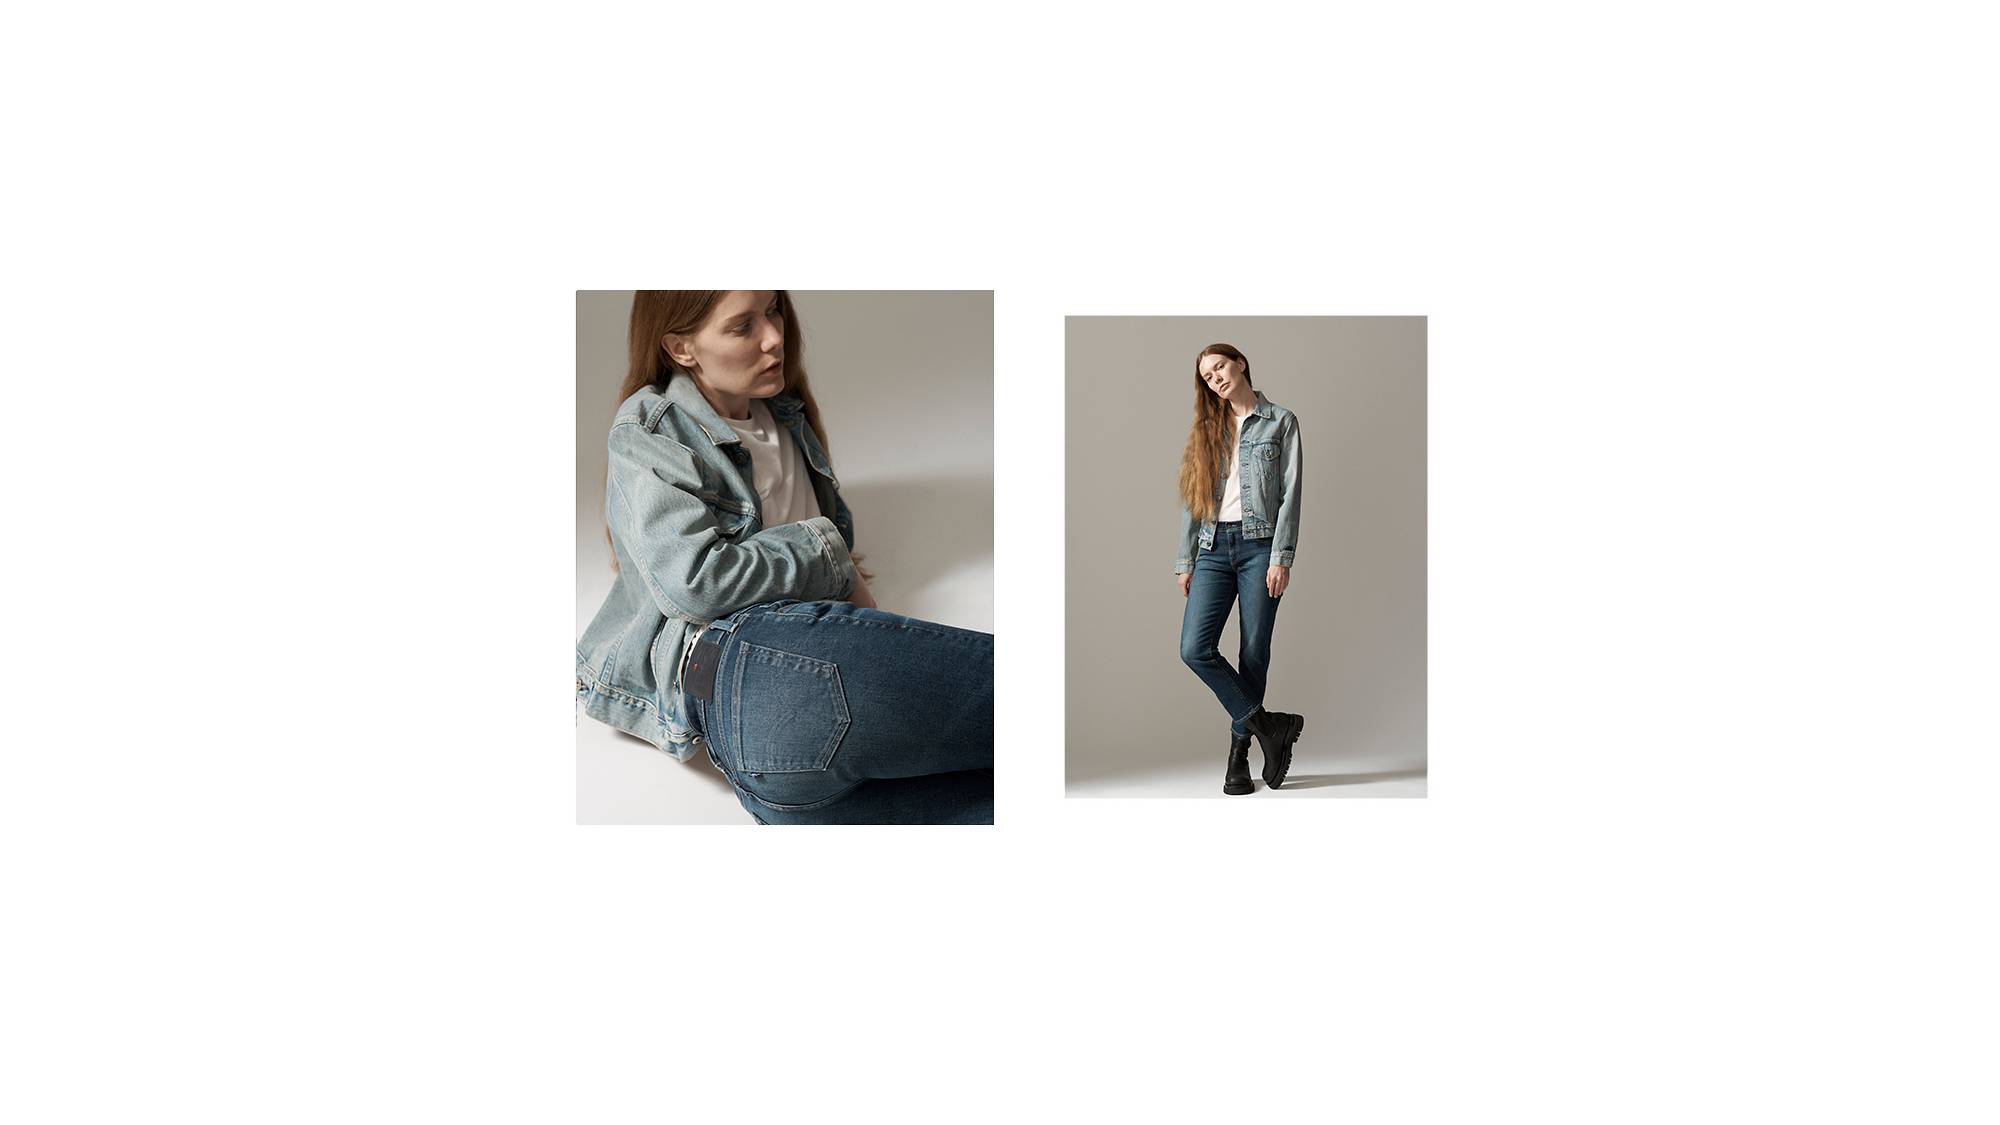 A collage of an image of a woman laying on the ground propped up on one elbow while wearing jeans and a jean jacket, and an image of the same woman standing up and crossing her legs.